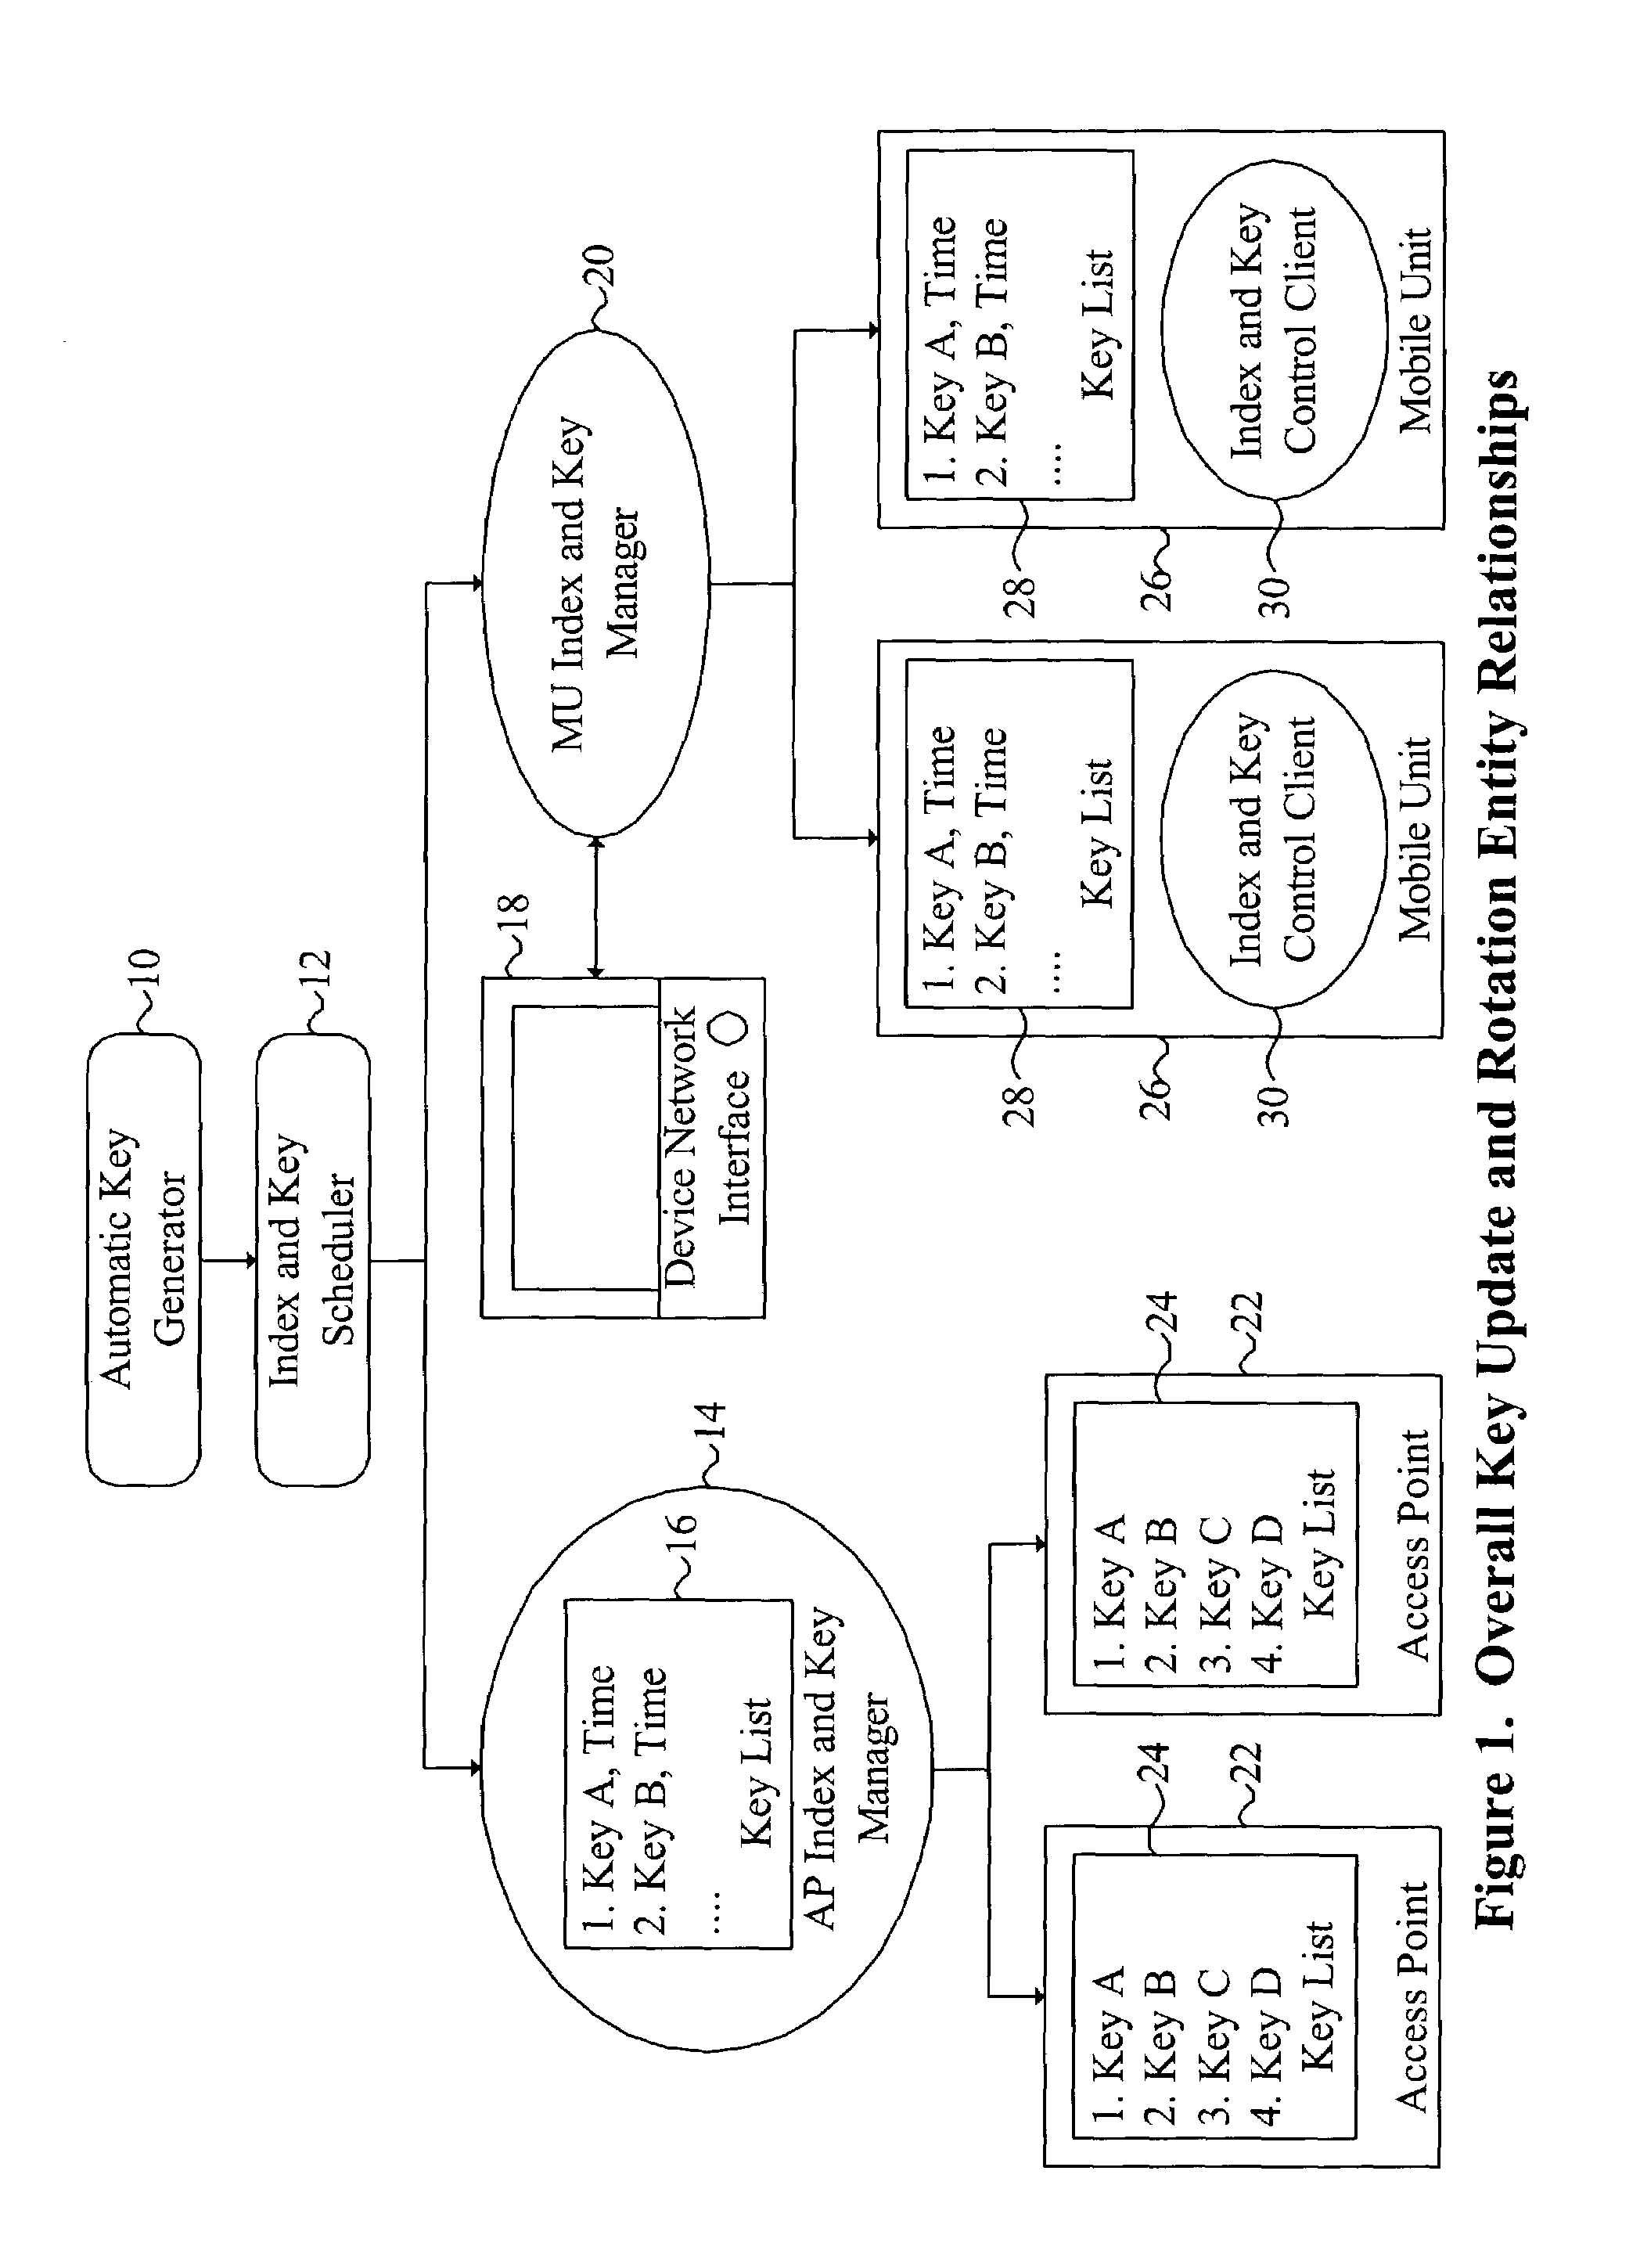 System and method for providing WLAN security through synchronized update and rotation of WEP keys